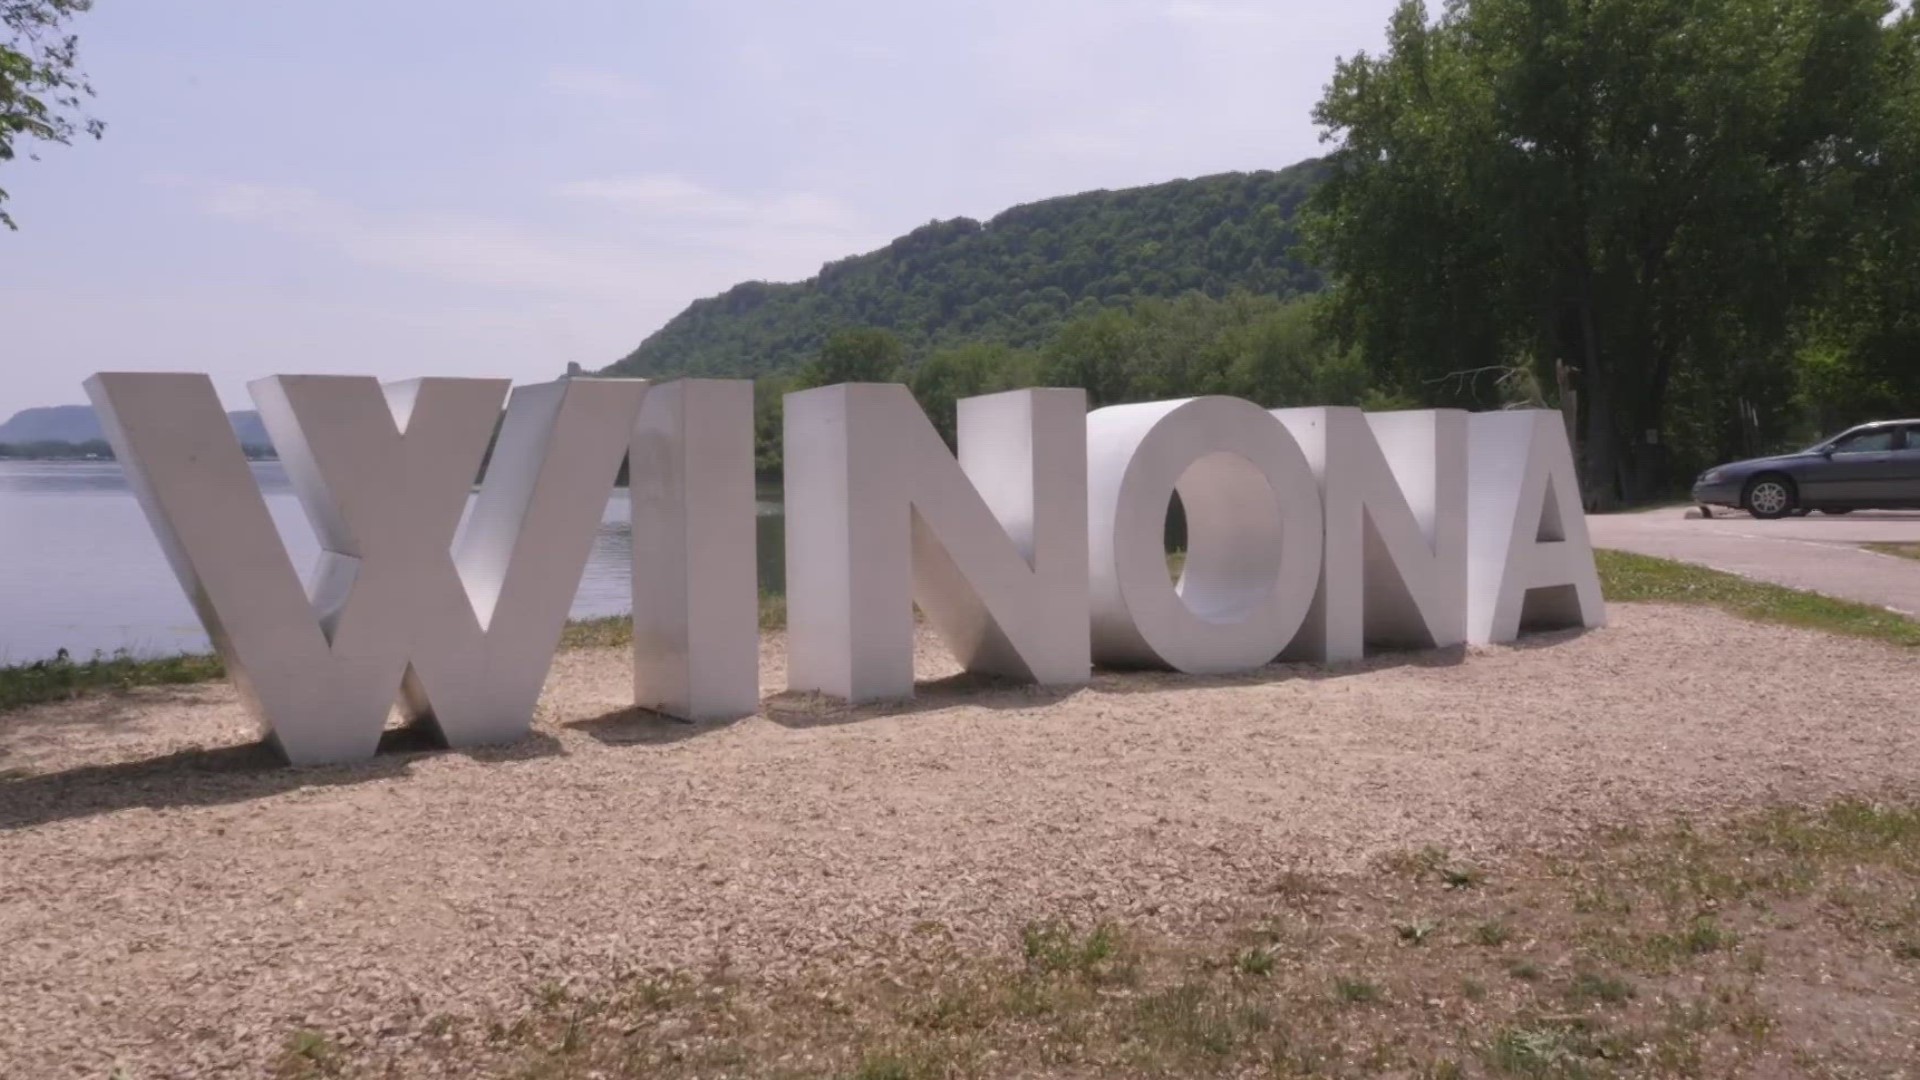 There's plenty to see in Winona, and if you live in the Twin Cities, it's a trip you can take on a single tank of gas.